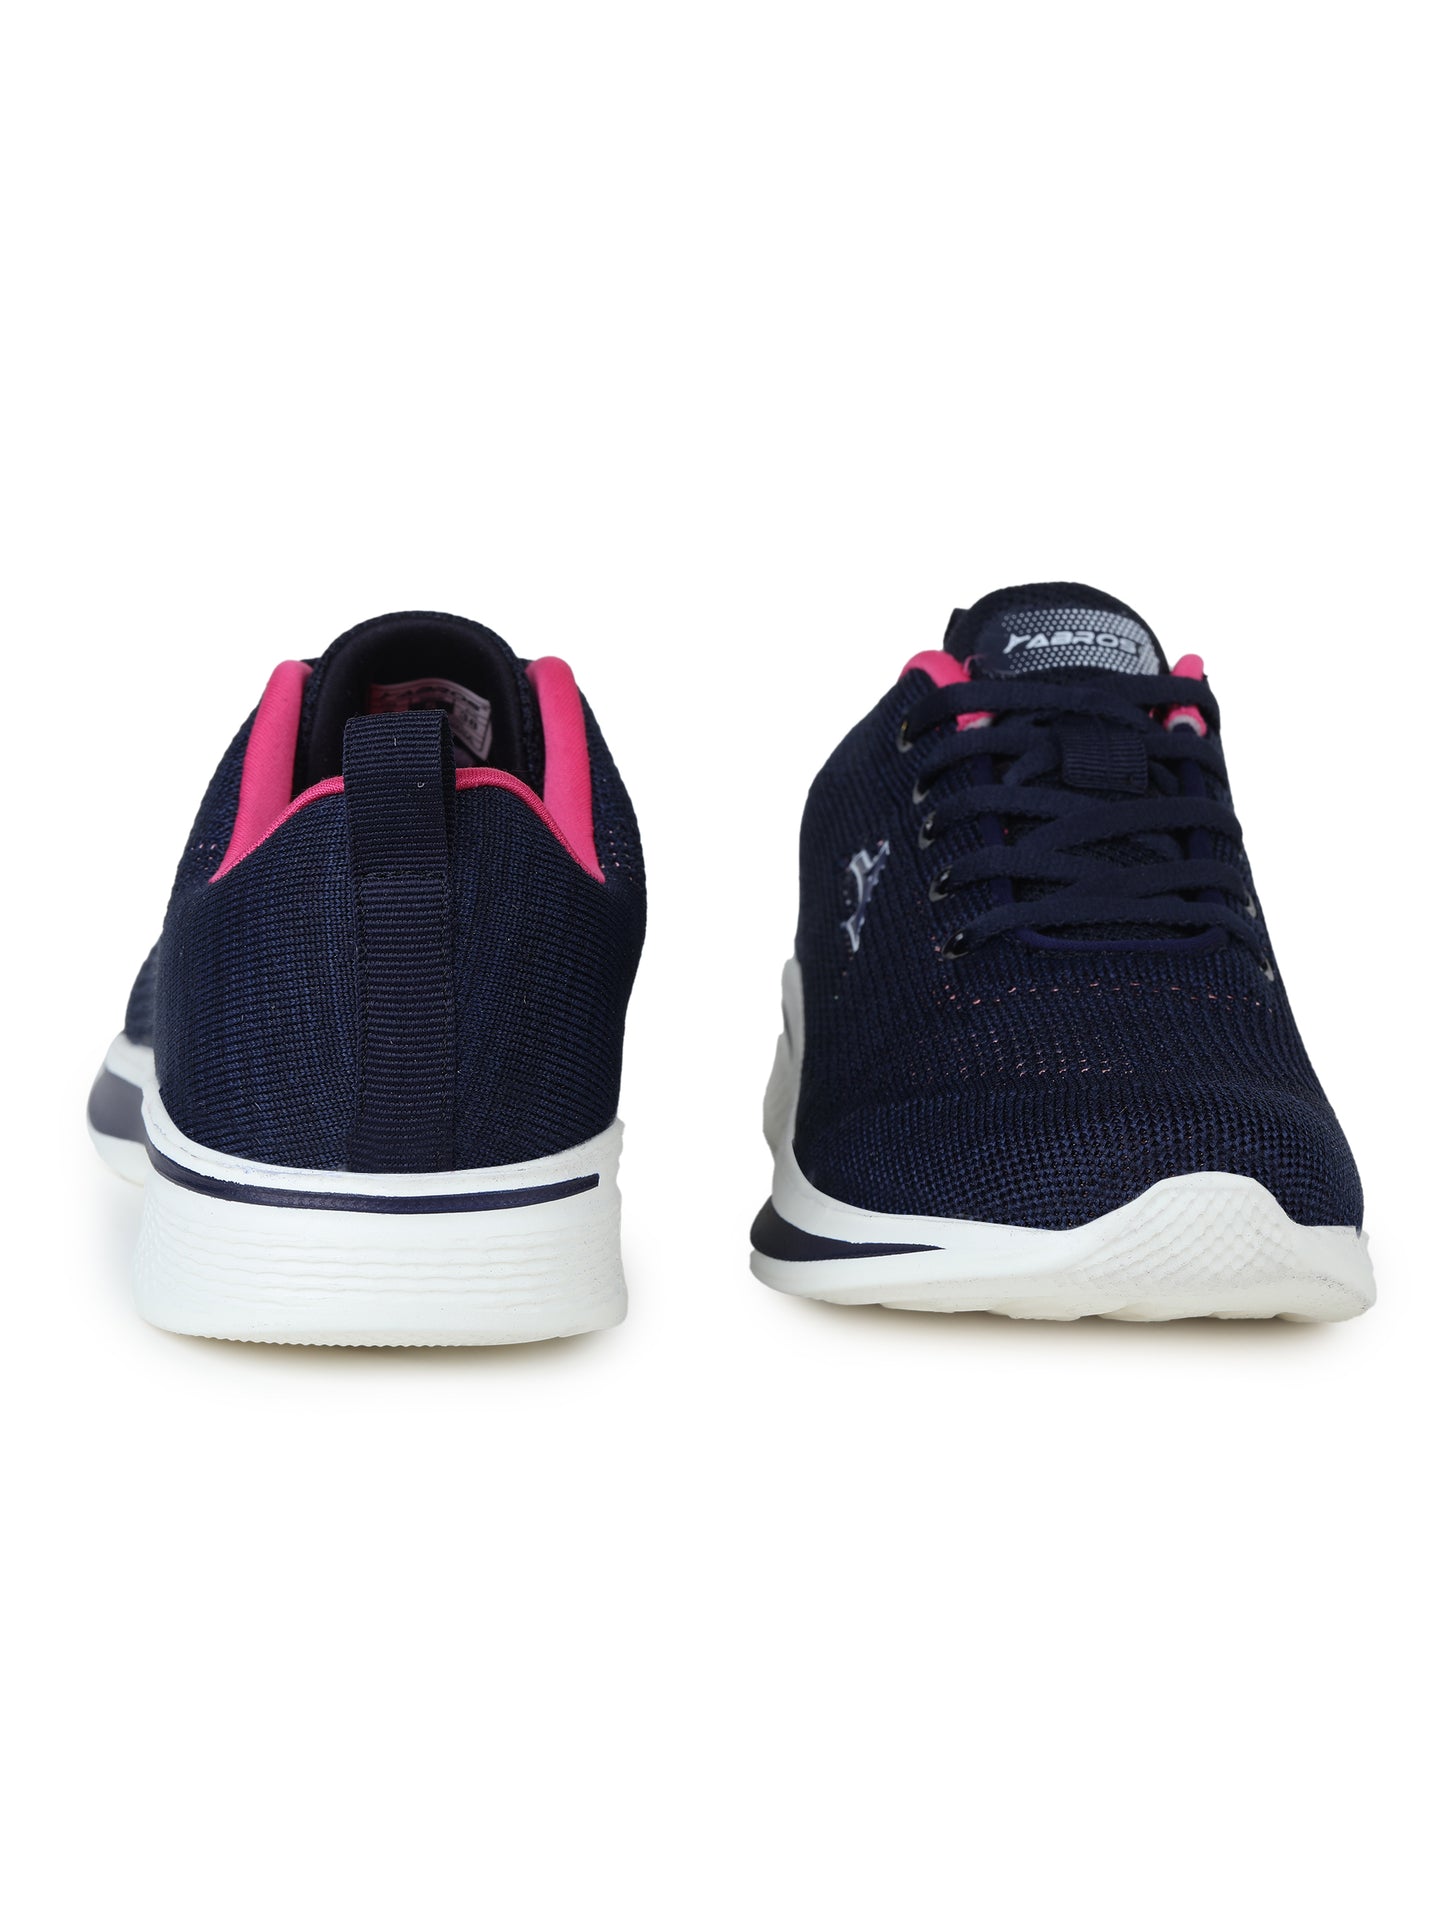 ABROS SOFIA-L SPORTS SHOES FOR WOMEN